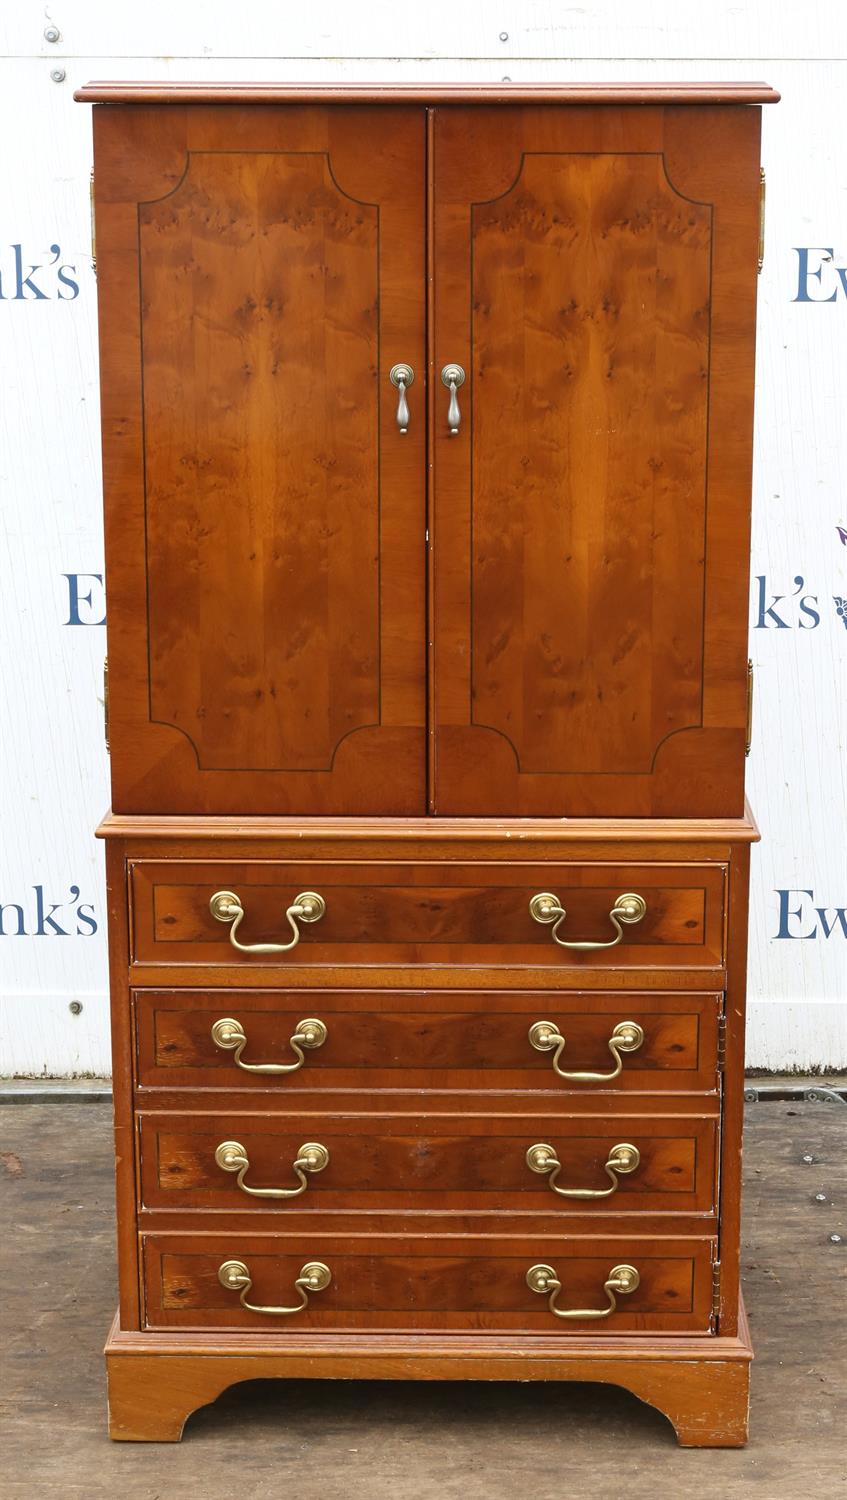 Reproduction yew wood music cabinet, with two doors enclosing shelves, above four drawers on